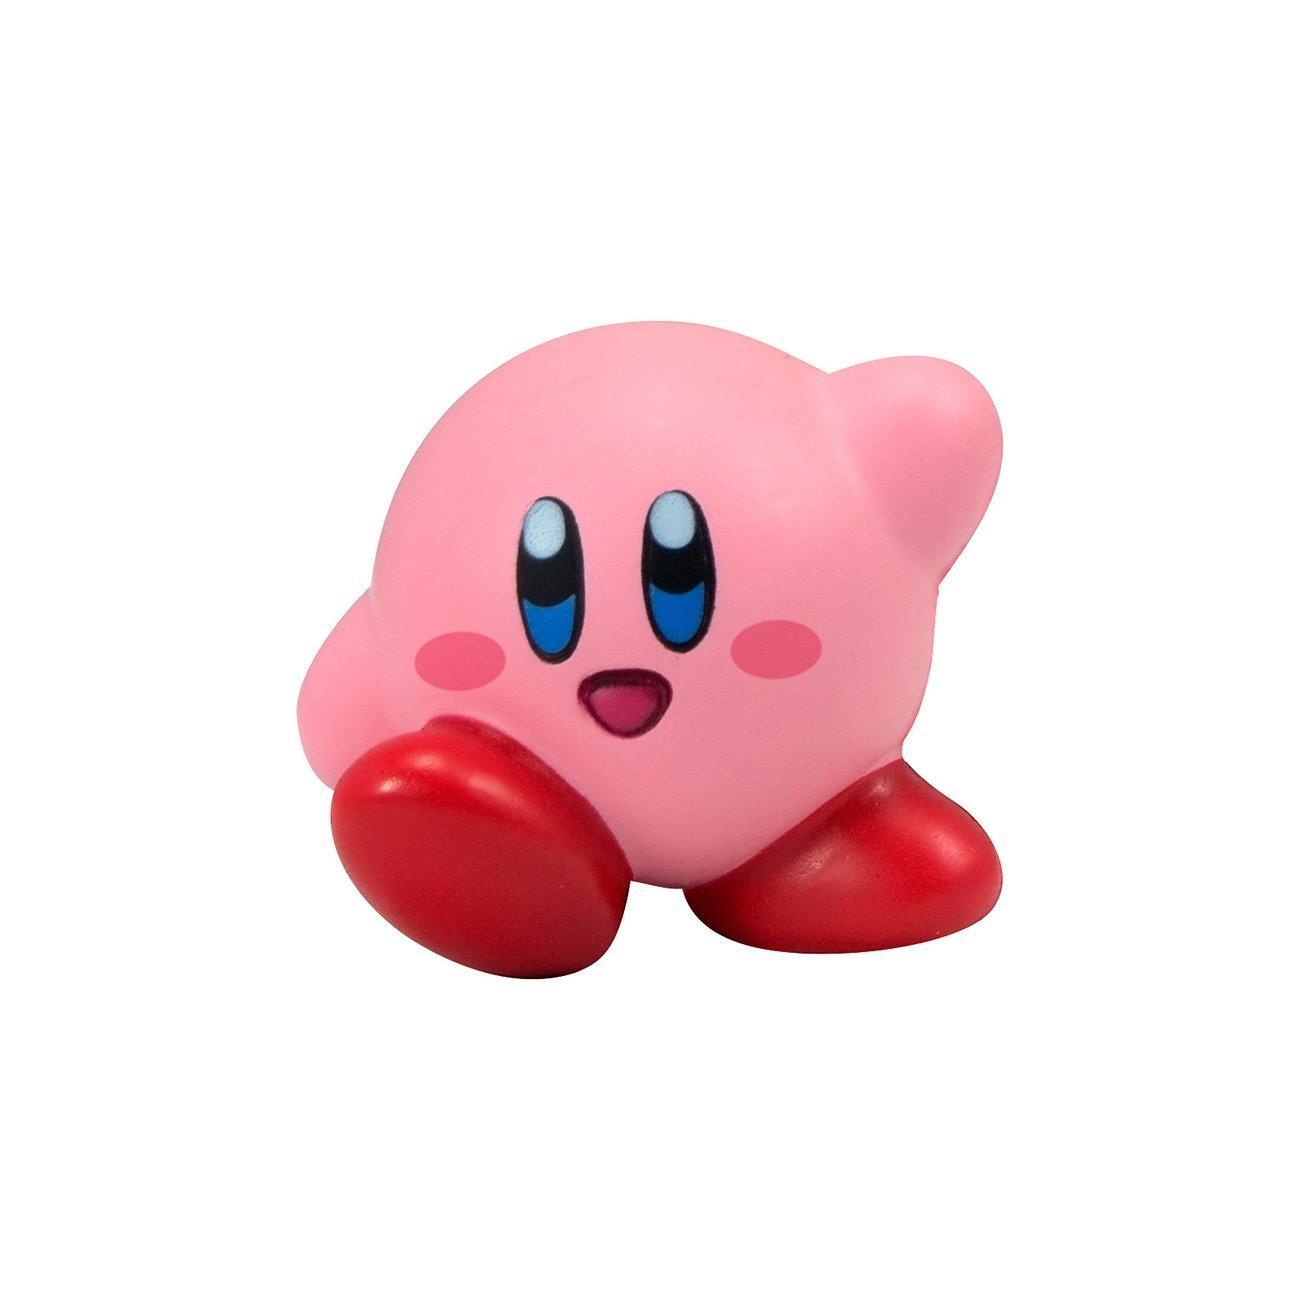 Just Toys Kirby 6 Inch Mega Squishme Figure : Target